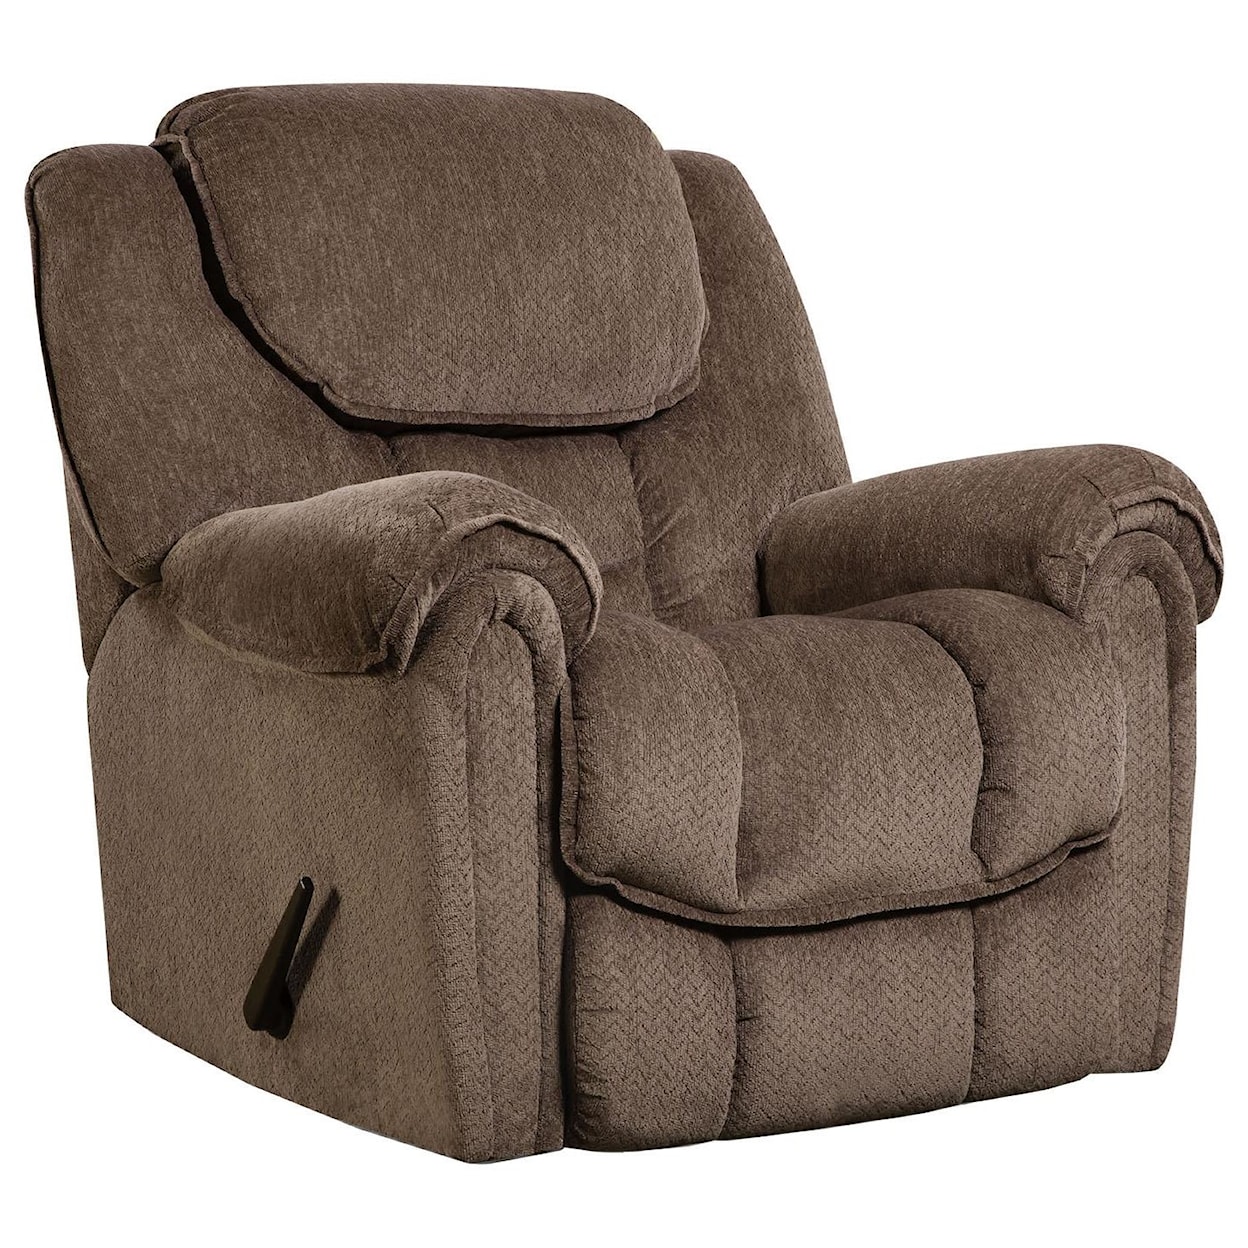 HomeStretch 122 OLD Casual Power Rocker Recliner